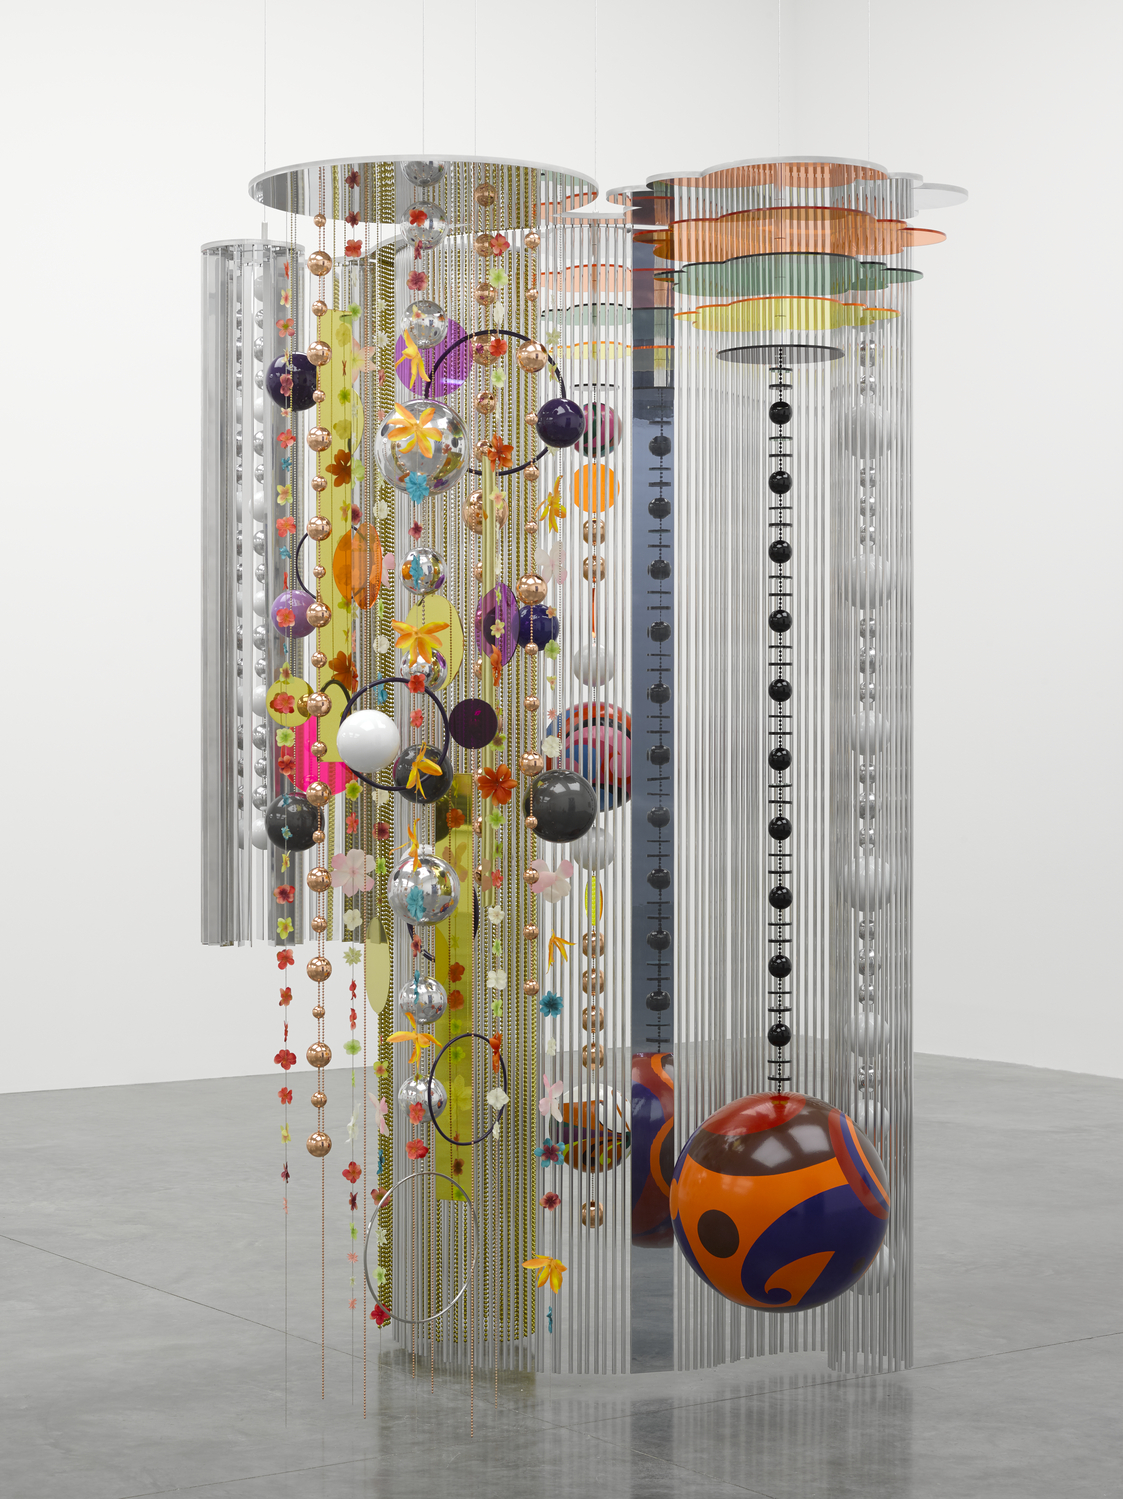 Beatriz Milhazes, Marola, 2015; Acrylic, hand-painted enamel on aluminum, stainless steel, and polyester flowers, 100 x 72 x 56 in.; Gift of Tony Podesta Collection; © Beatriz Milhazes Studio; Image courtesy of White Cube Gallery; Photo by Ben Westoby